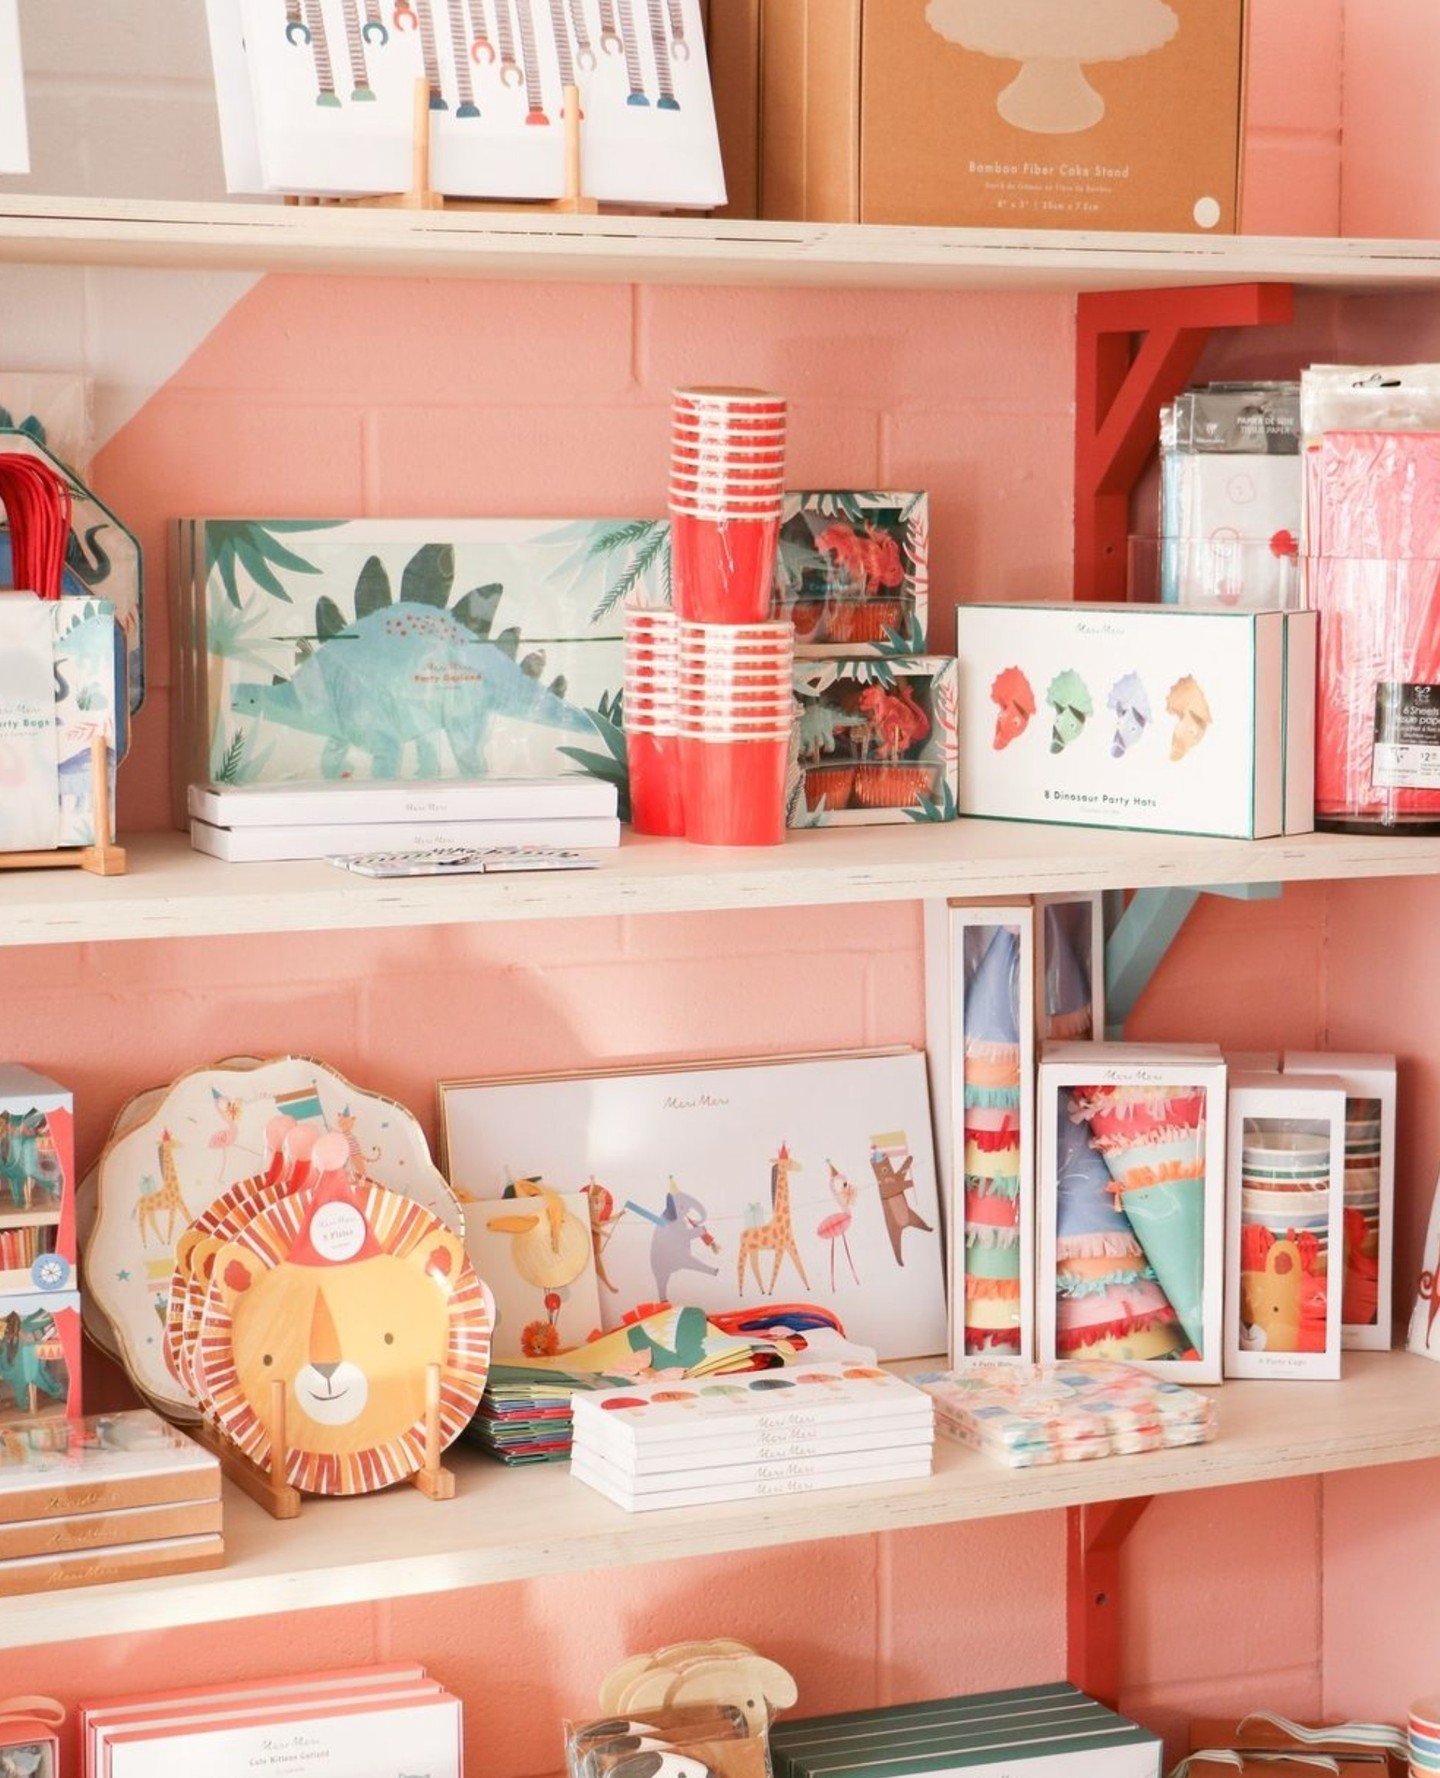 It's Meri Meri season at @boucleetpapier in Montr&eacute;al 😇 doesn't it make you want to dress up and throw a party? ⁠
⁠
Want to be featured? 📸 Tag us in your #shelfies ⁠
⁠
#papereclips #merimeriparty #canadianwholesale #wholesalecanada